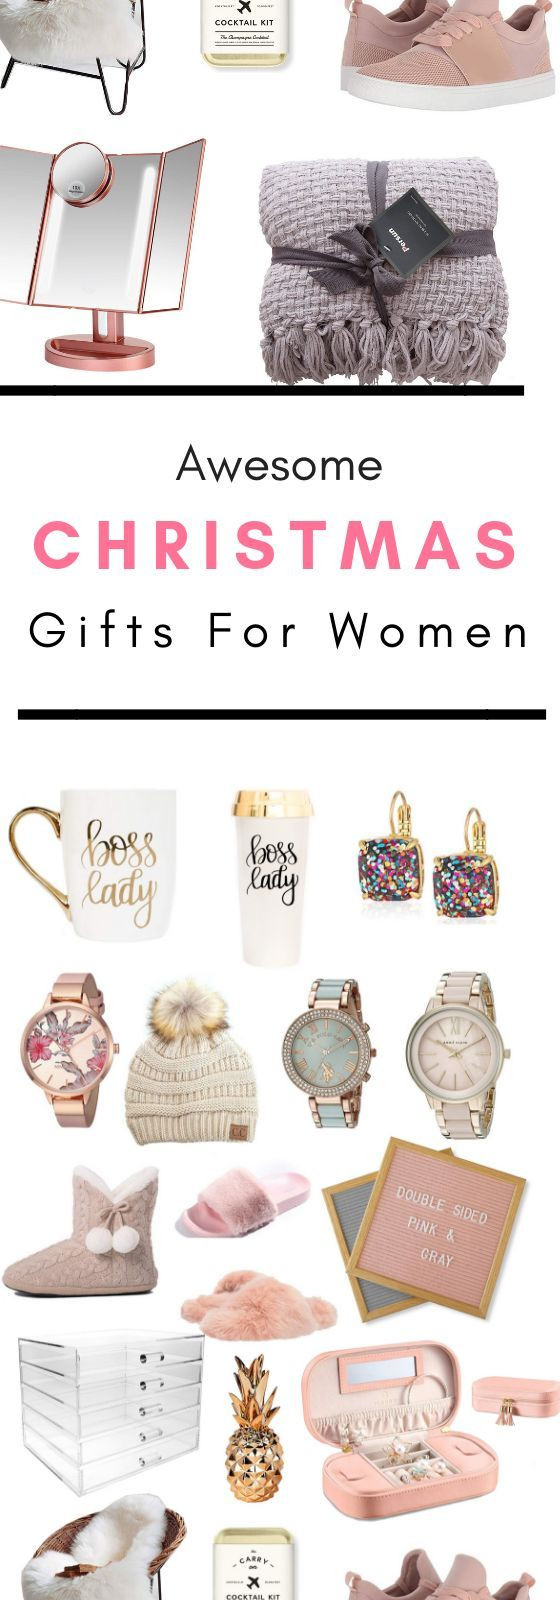 Gift Ideas For Girlfriends Mom
 Find unique Christmas ts ideas for women for any bud